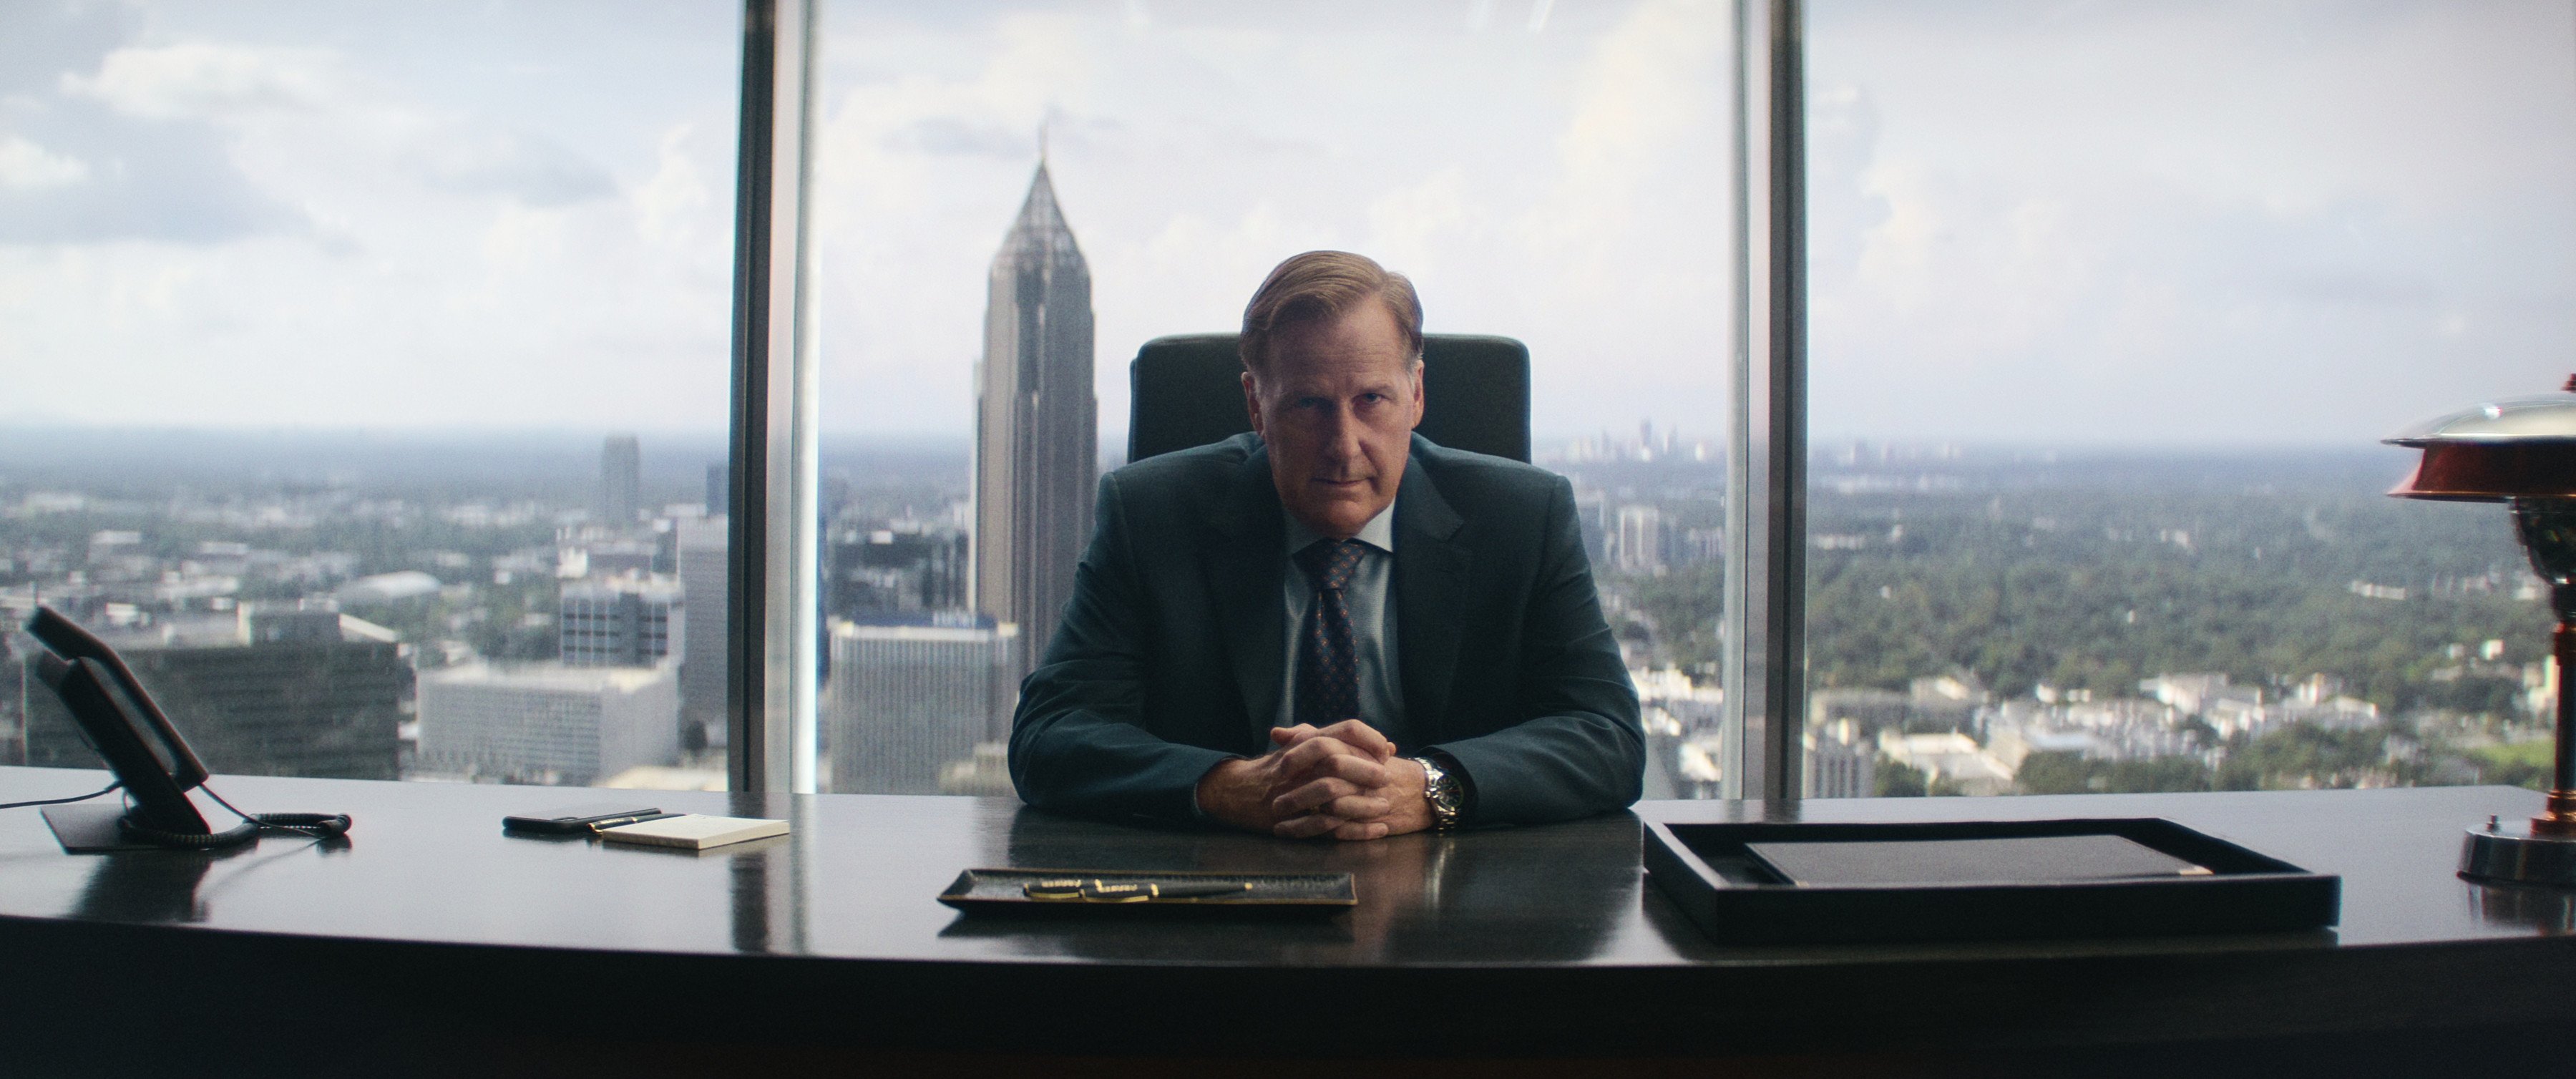 Netflix miniseries A Man in Full, adapted from the Tom Wolfe novel of the same name, stars Jeff Daniels as Charlie Croker (above), a pompous property tycoon whose empire is facing collapse. Photo: Netflix